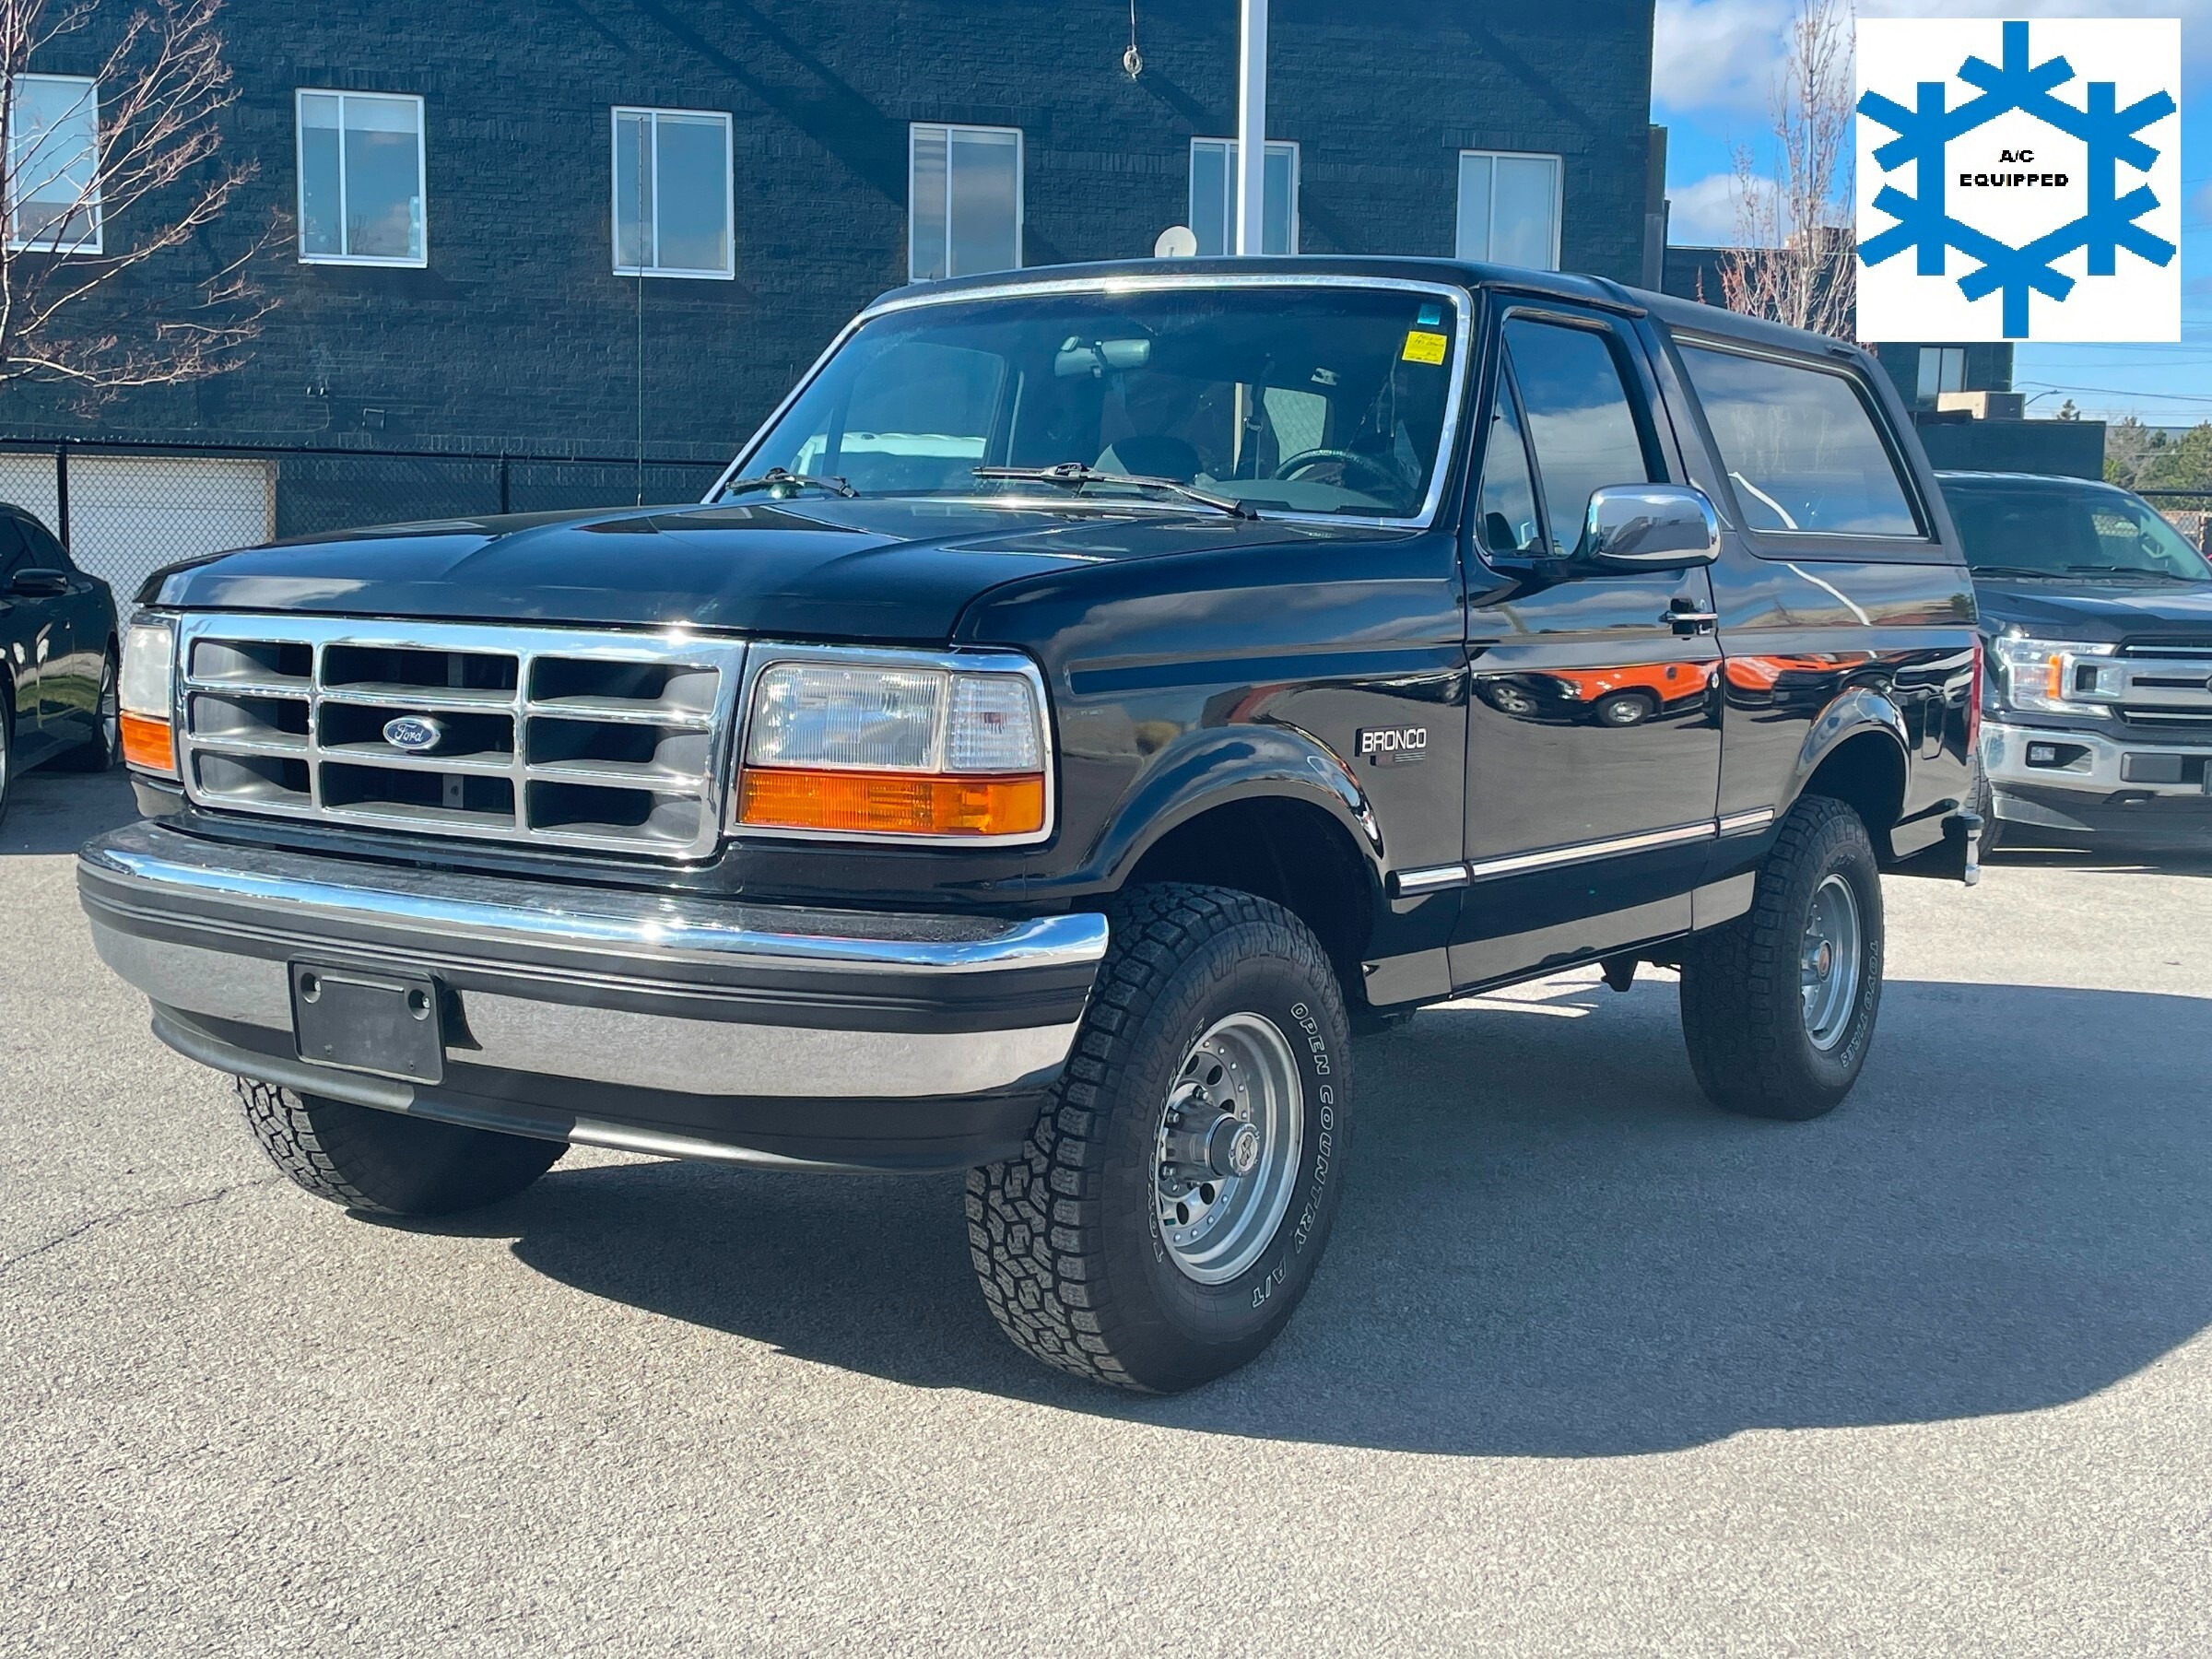 1993 Ford Bronco Comes with soft top